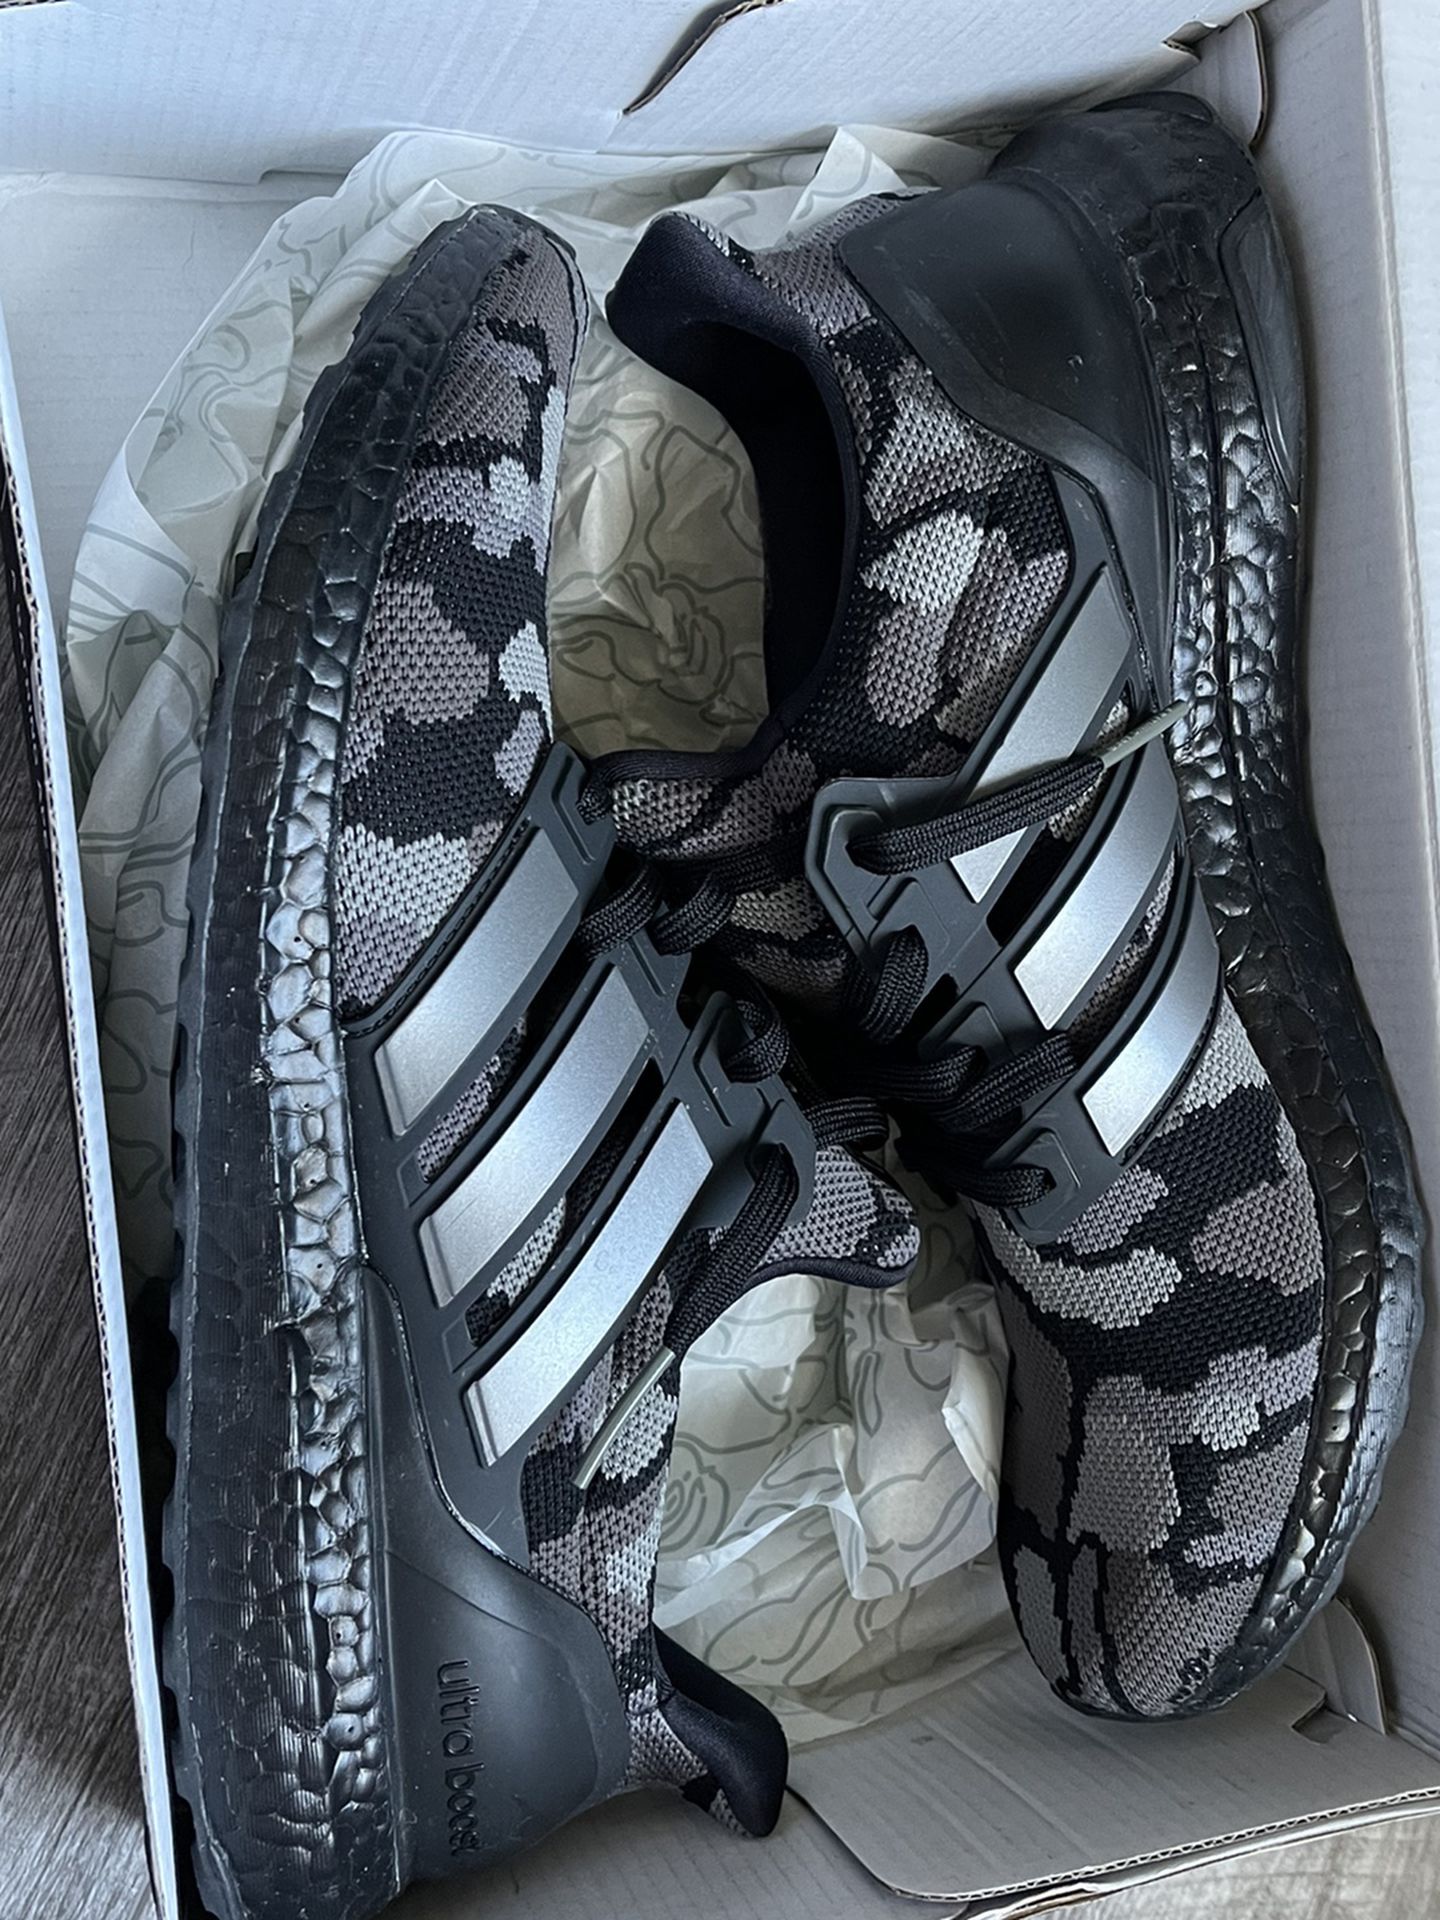 Bape ultraboost black size 9 Offers Accepted Need Gone Asap